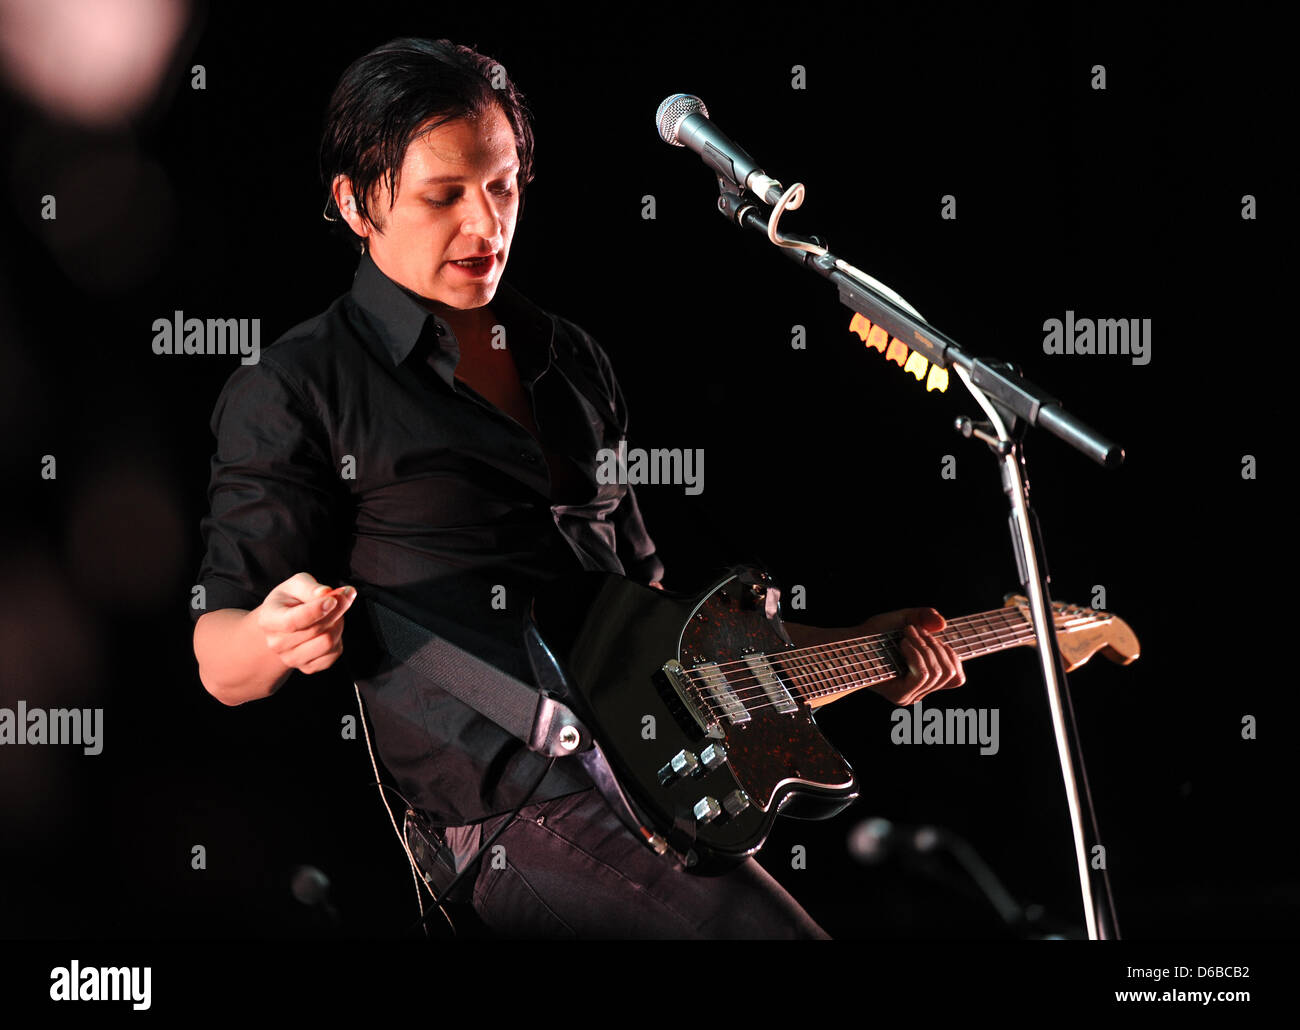 Singer Brian Molko of the British band Placebo performs on stage at the  Veltins-Arena in Gelsenkirchen, Germany, 25 August 2012. Tens of thousands  of people attended the one-day festival 'Rock im Pott'.